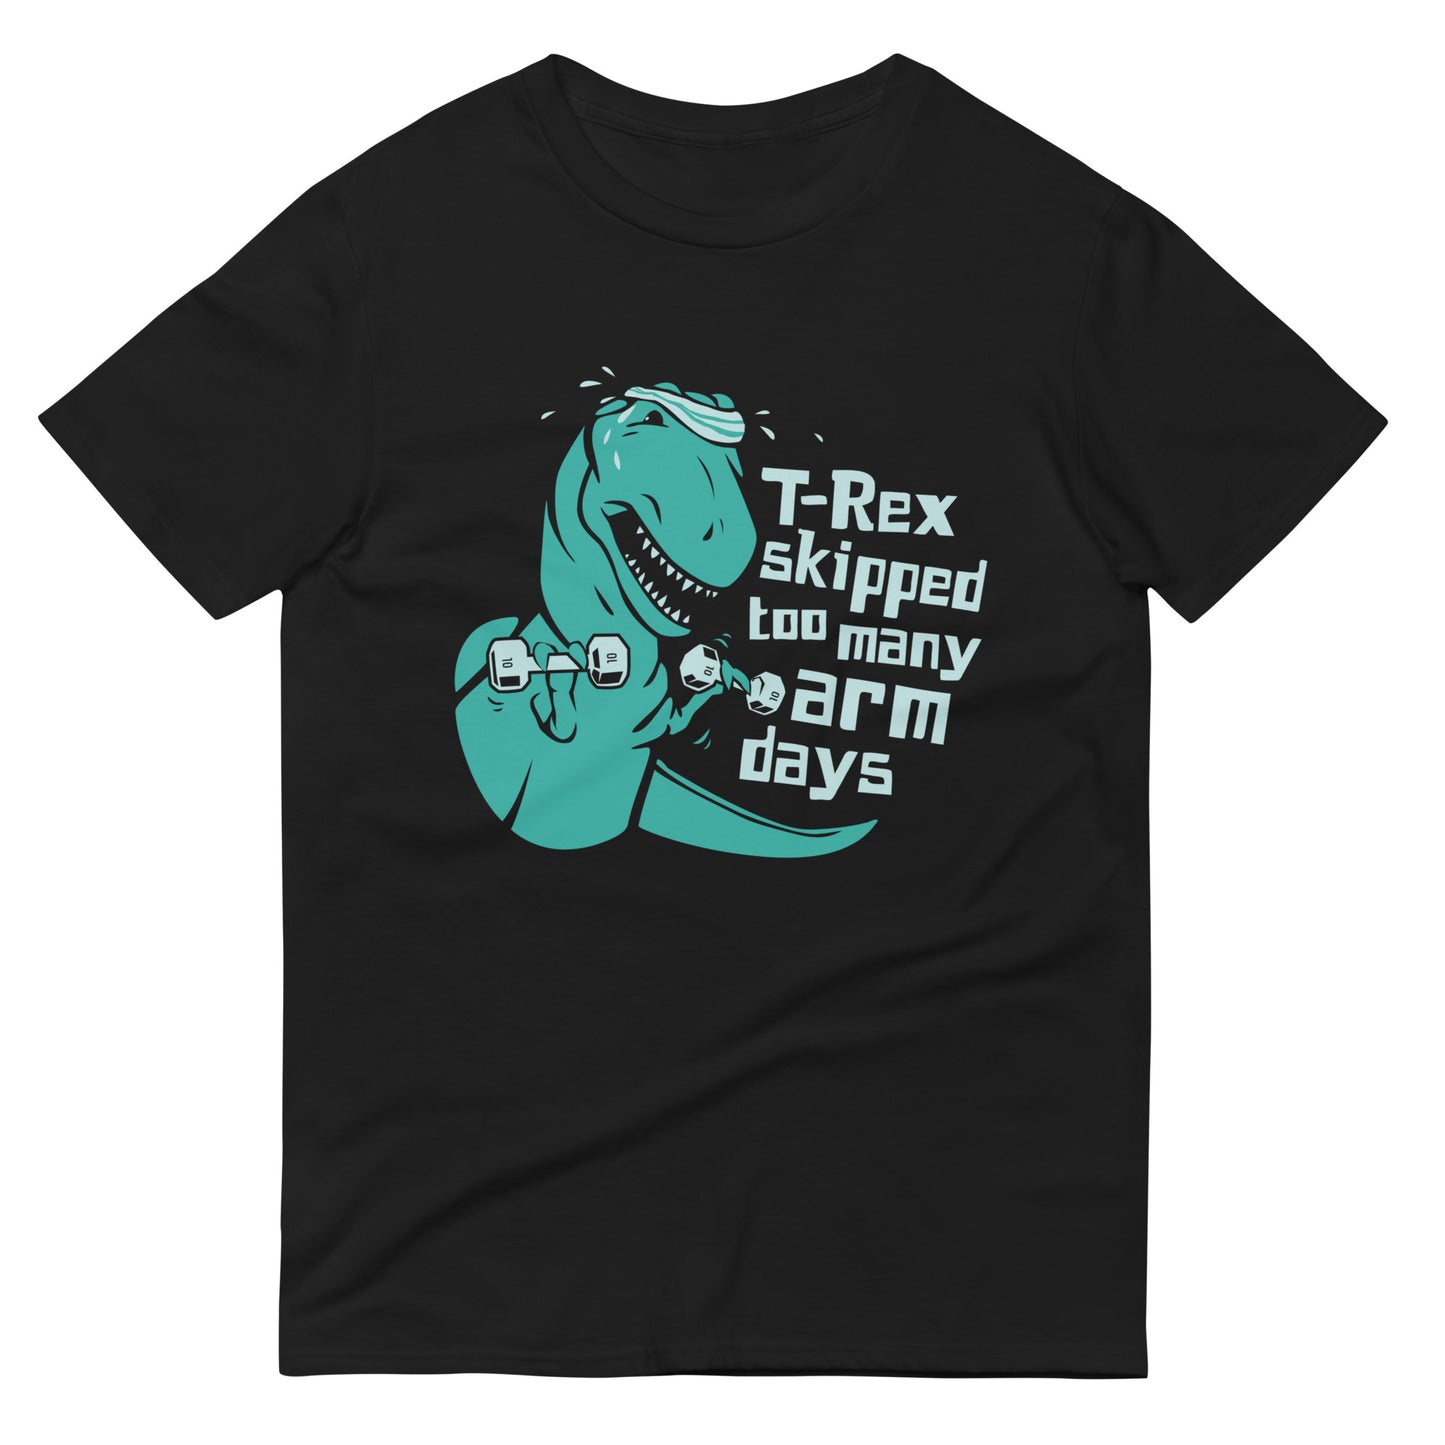 T-Rex Skipped Too Many Arm Days Men's Signature Tee